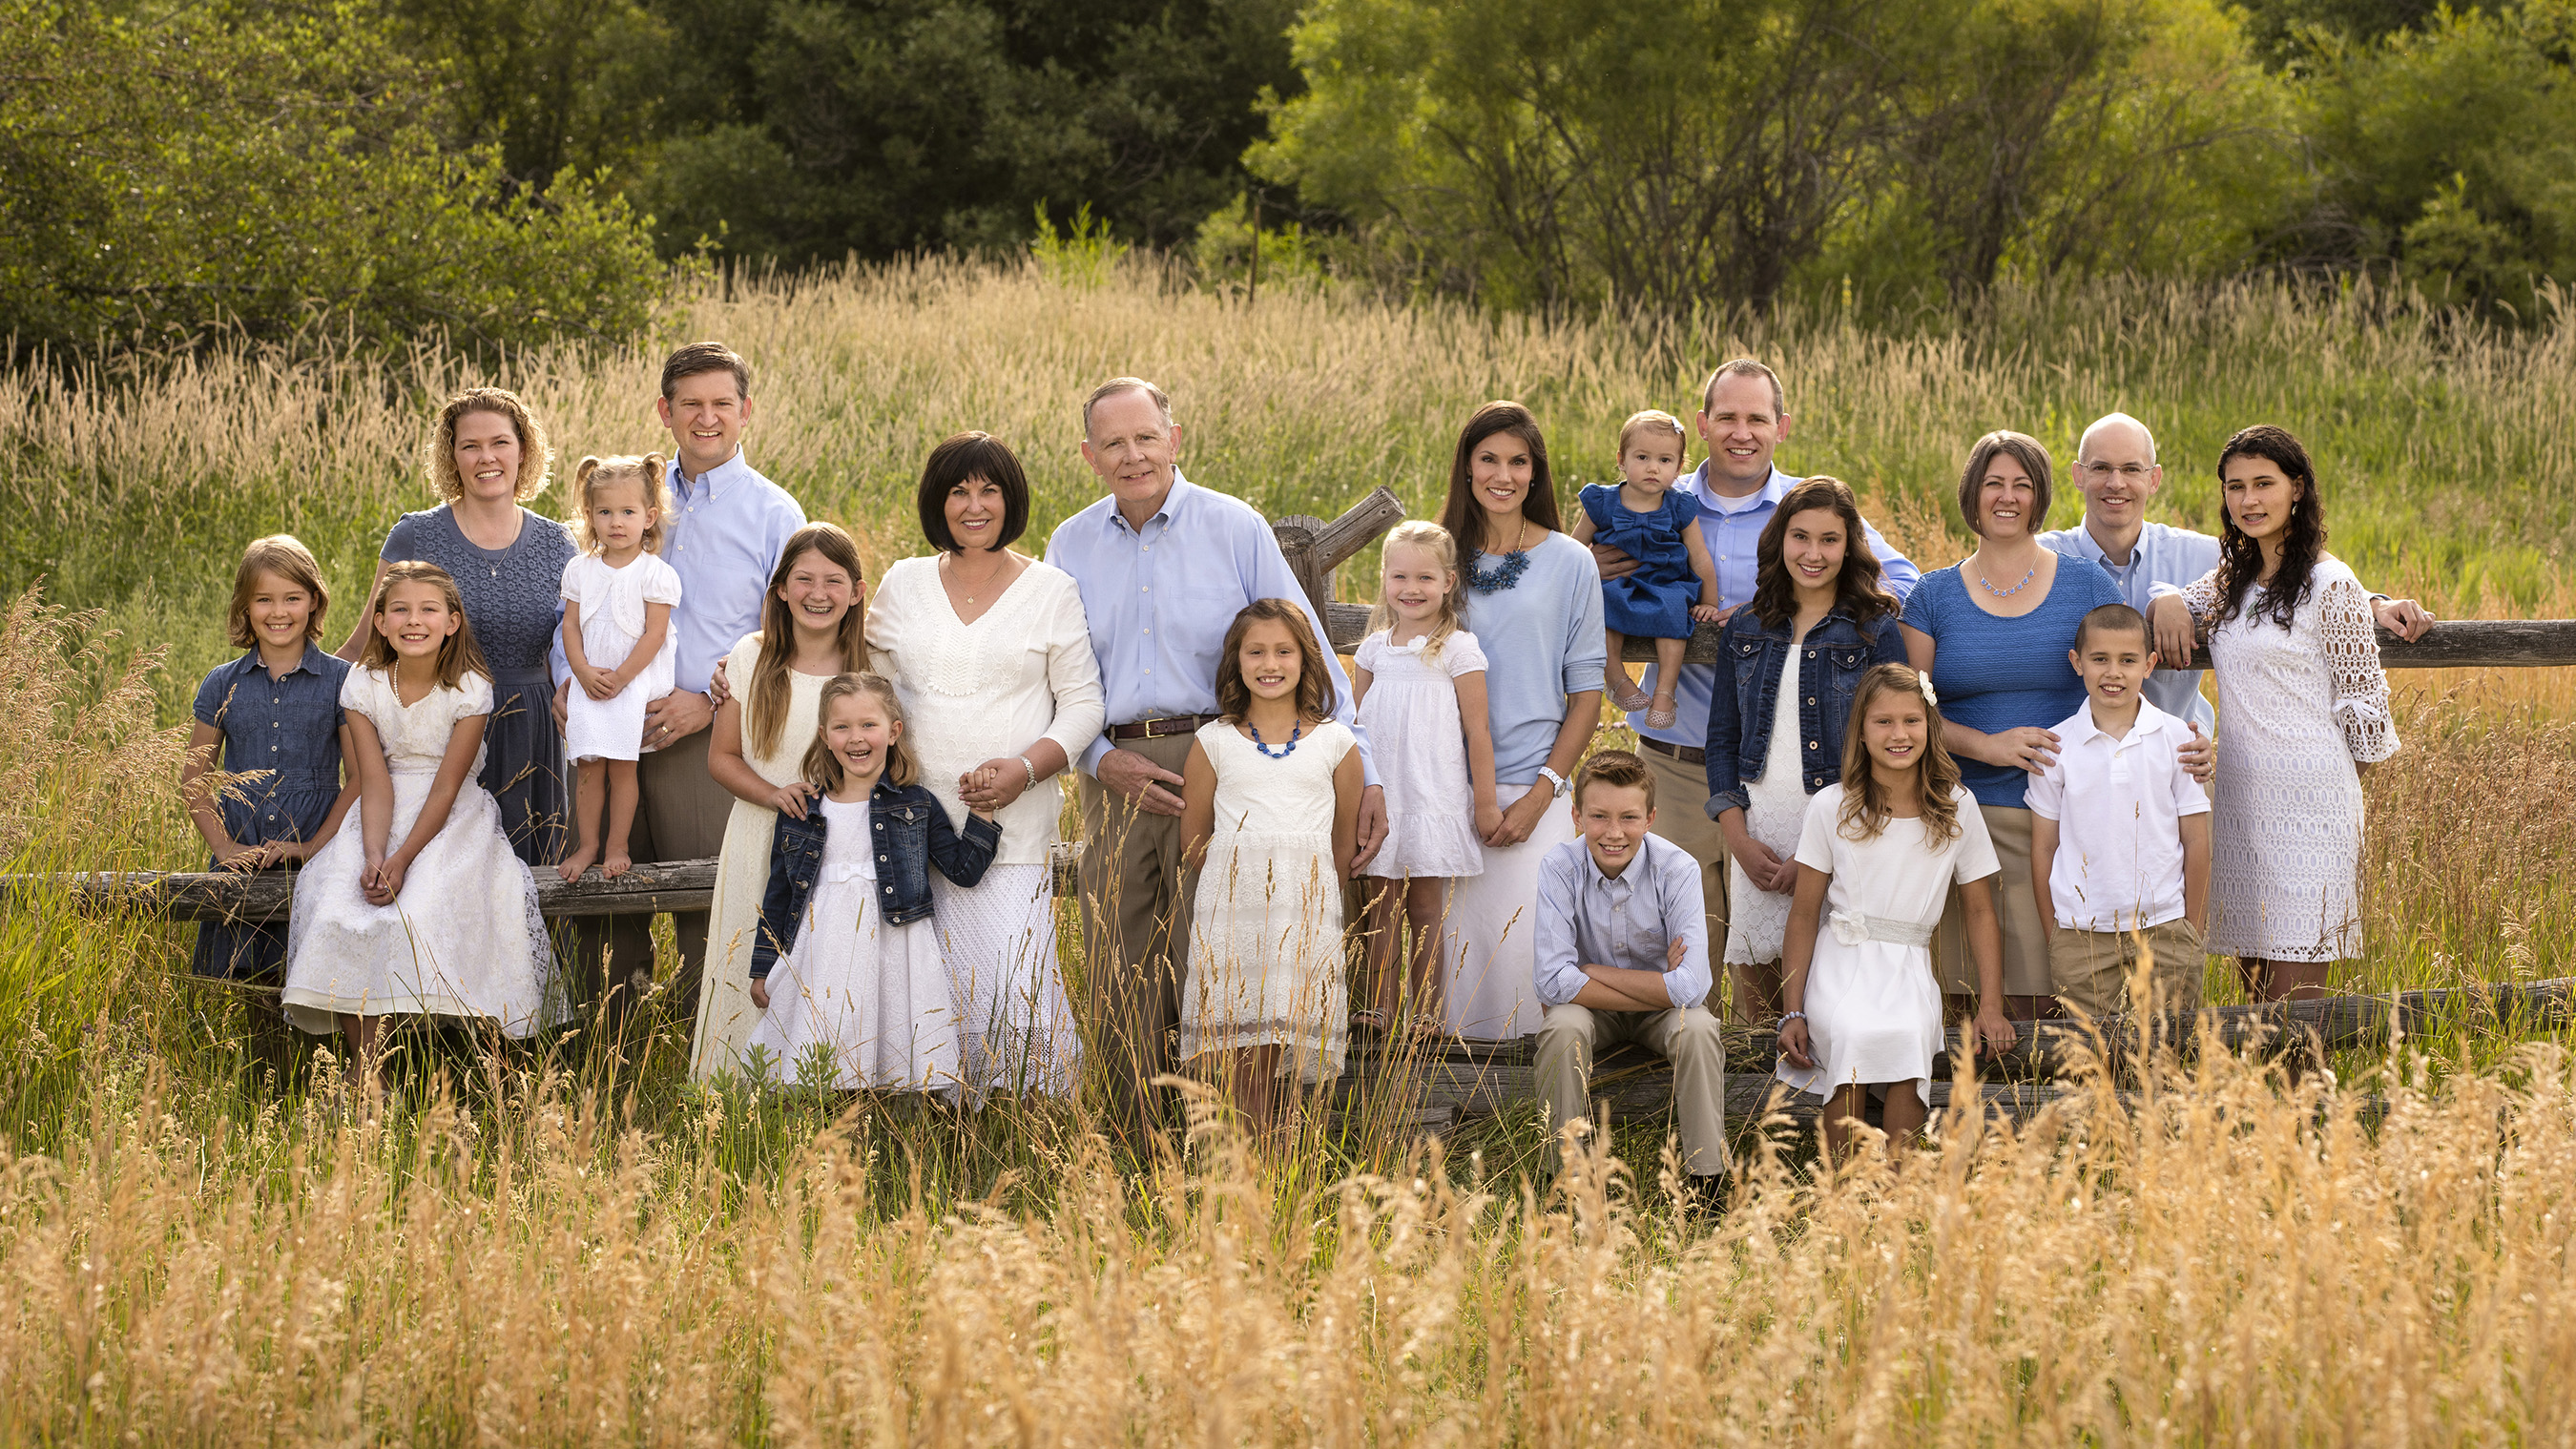 Sonora Family Photographer | Family Photos at Indigeny Reserve | Christine  Dibble Photography - Sonora CA, Photographer: Christine Dibble